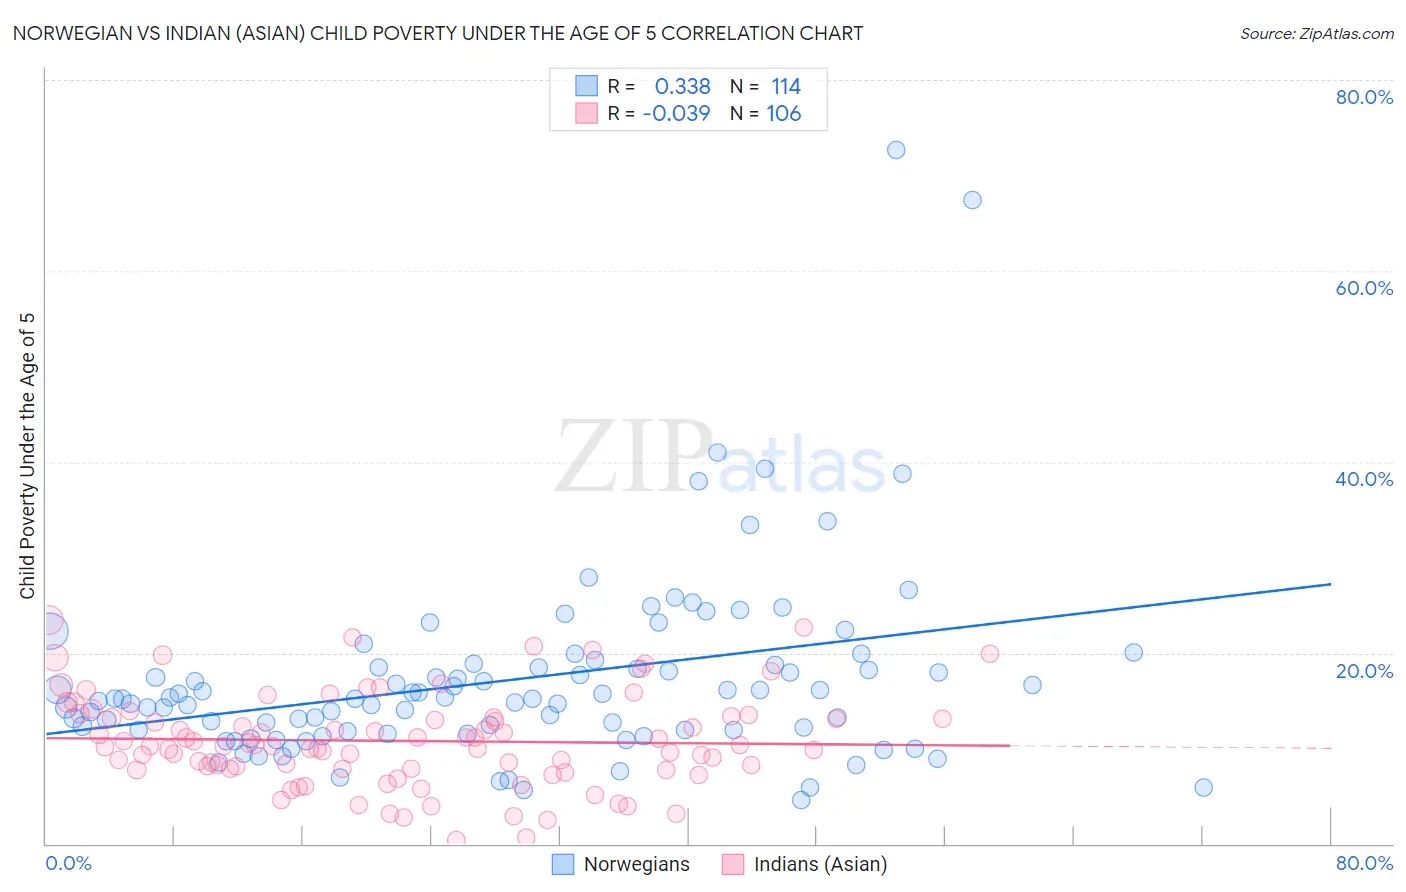 Norwegian vs Indian (Asian) Child Poverty Under the Age of 5